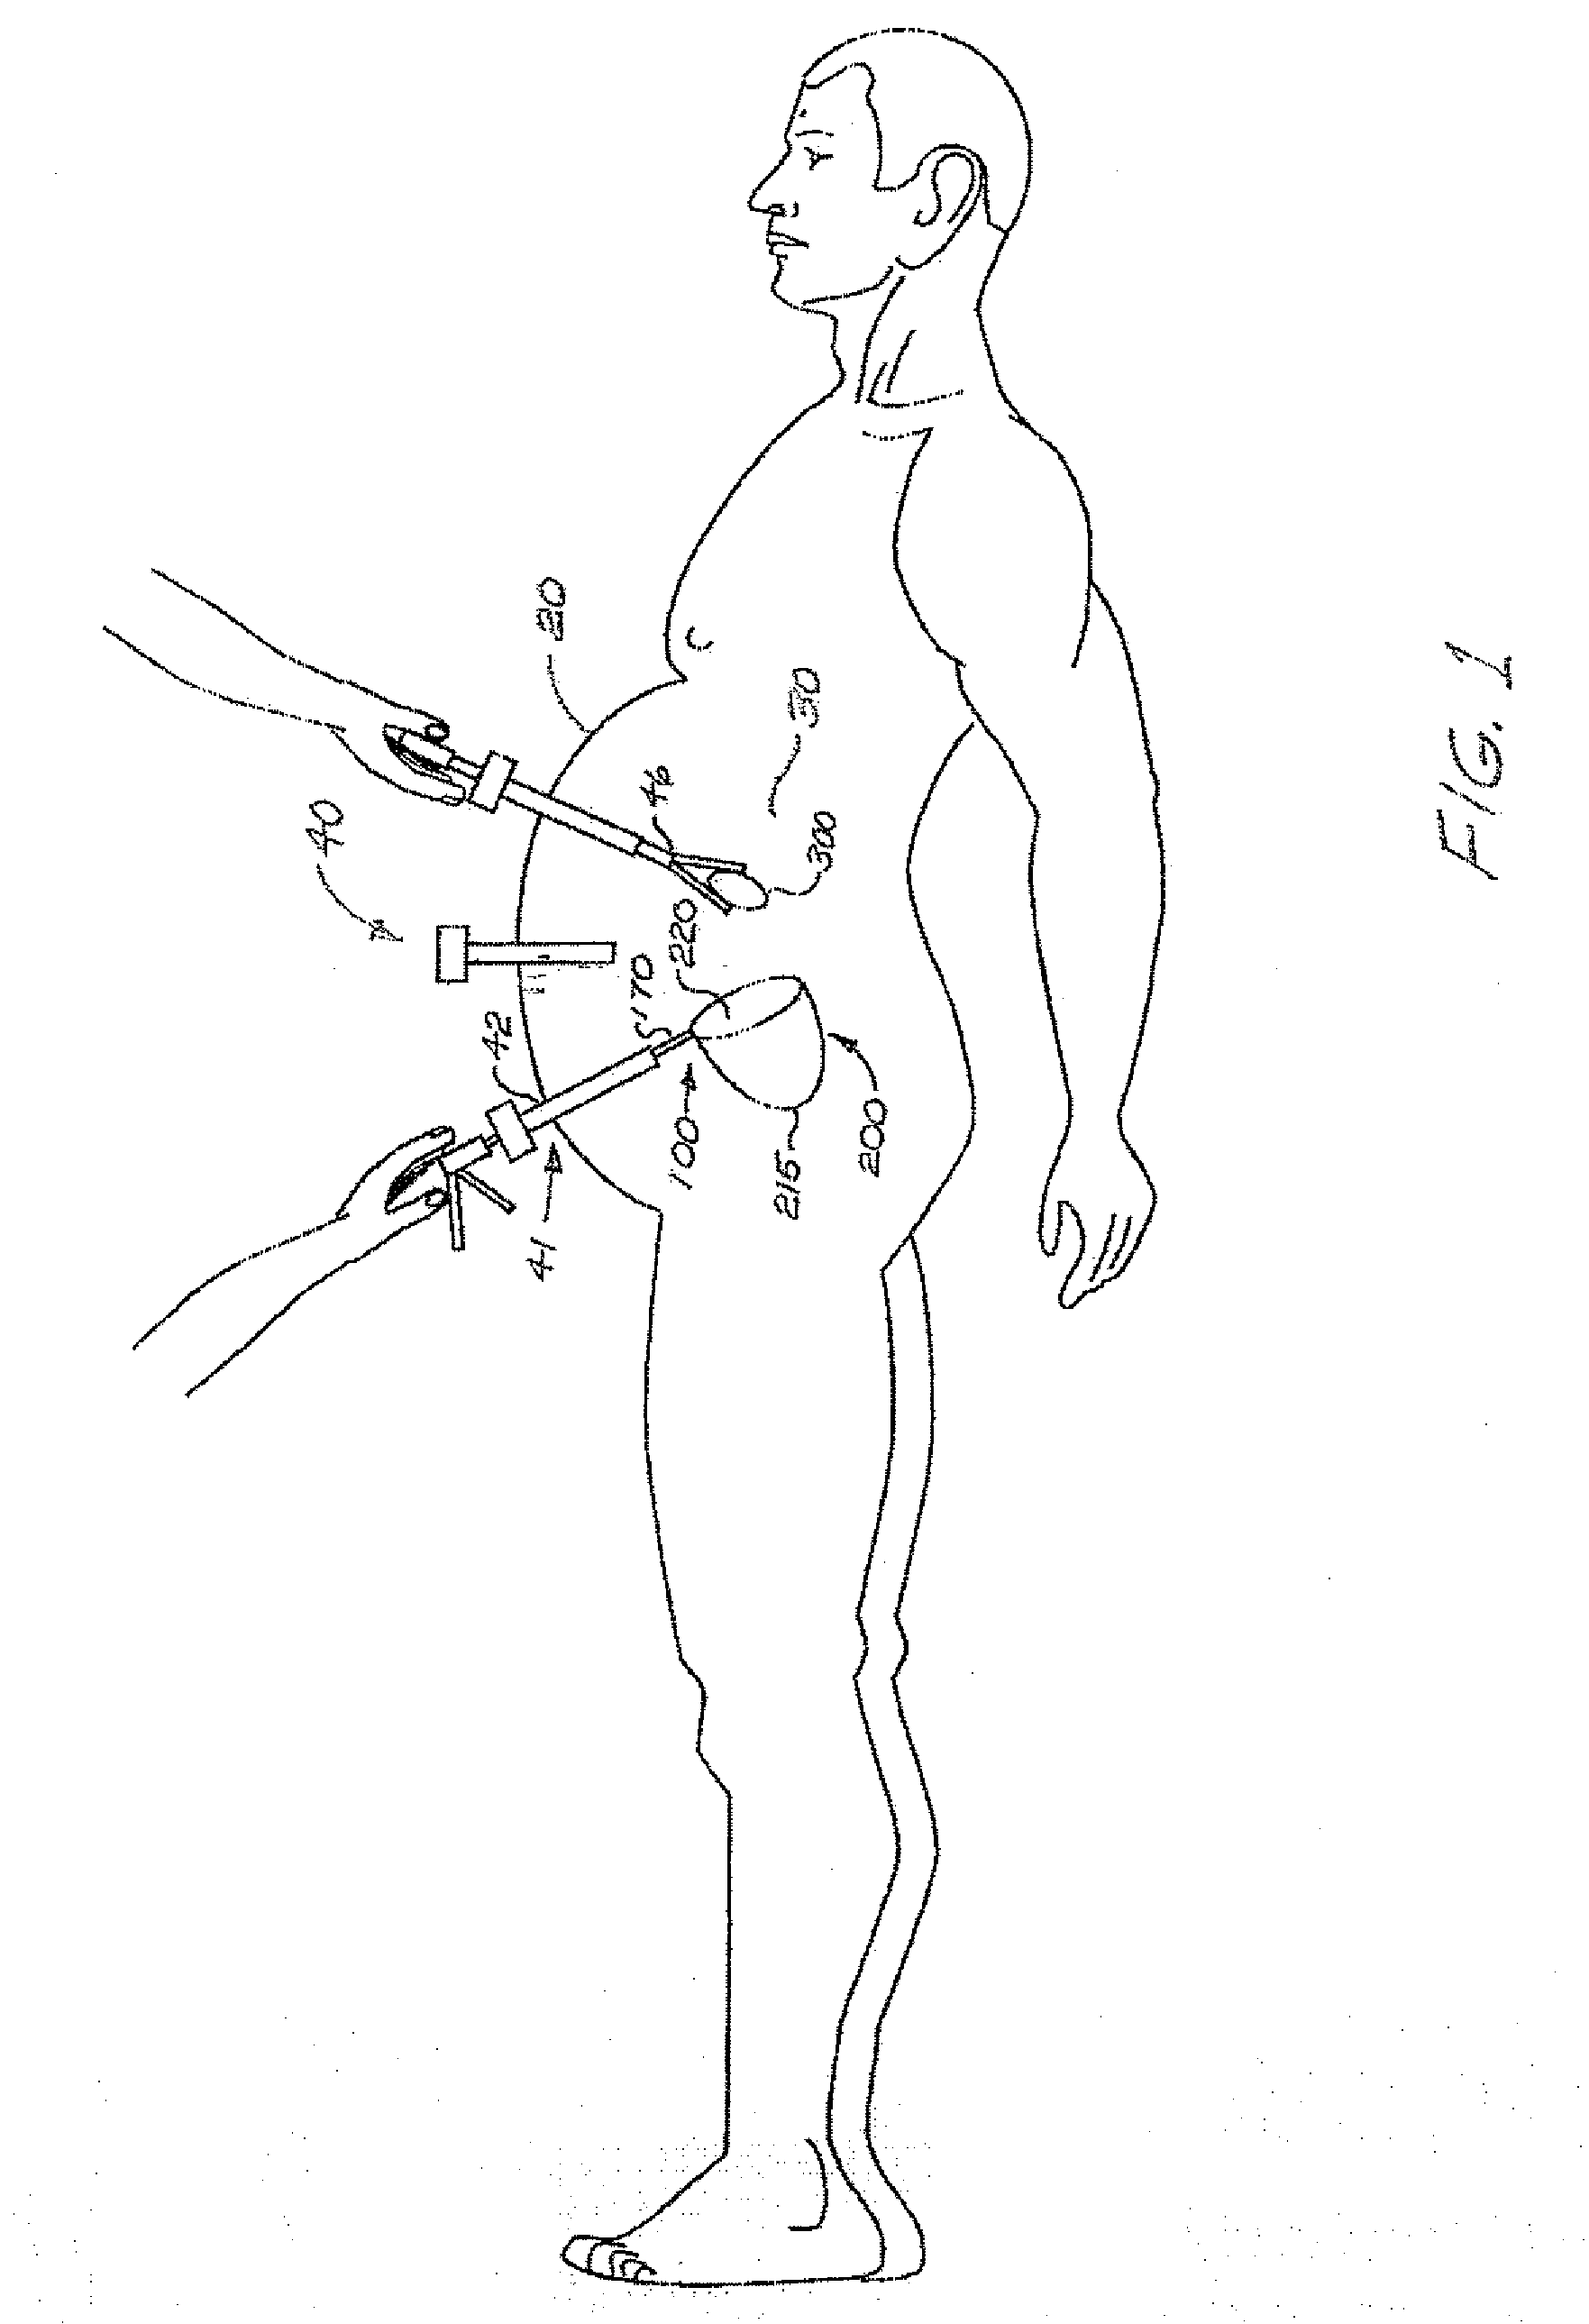 Device for isolating and removing tissue from a body cavity